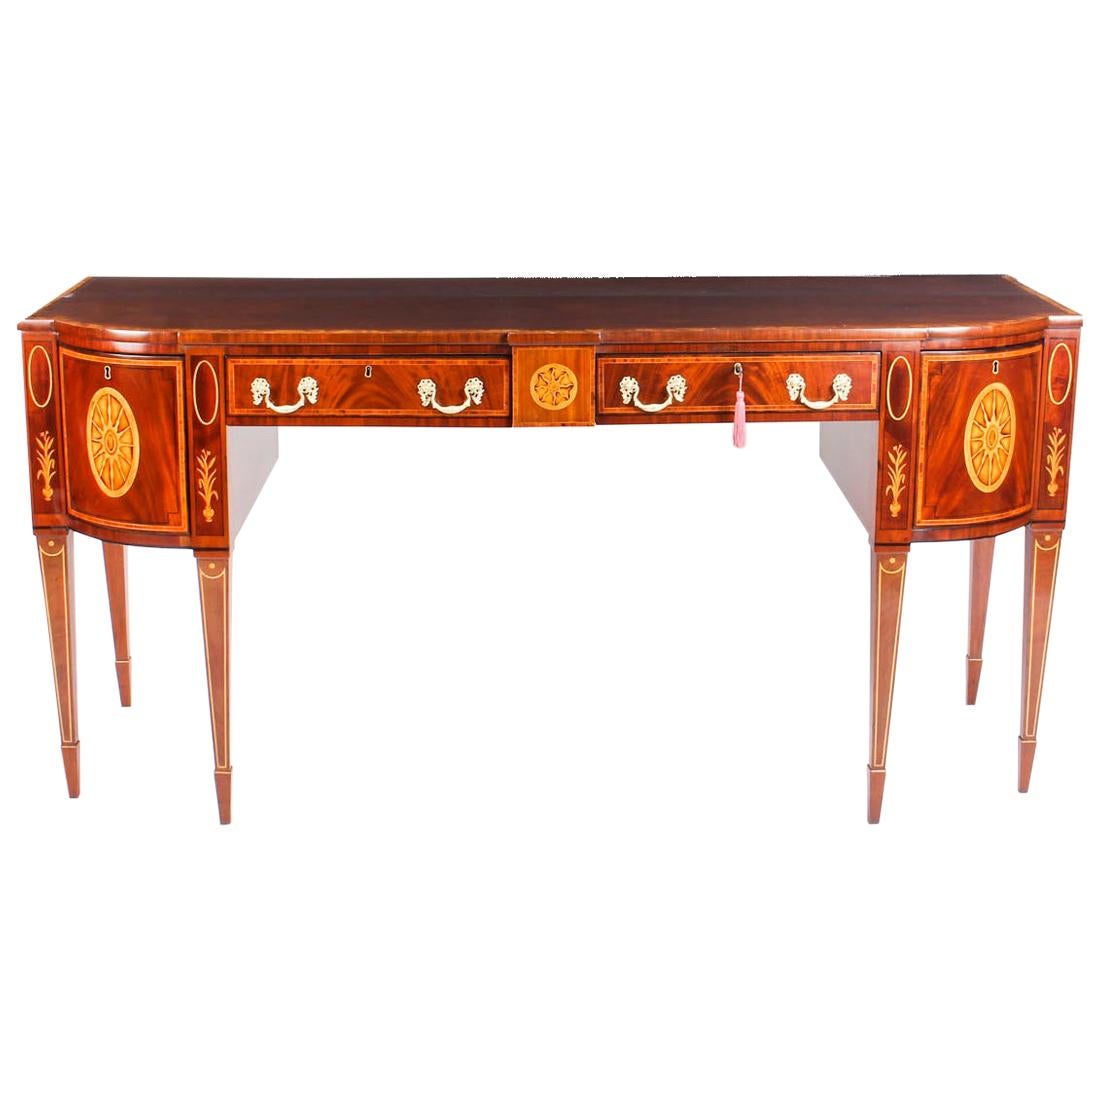 Antique Regency Flame Mahogany and Satinwood Inlaid Sideboard, 19th Century